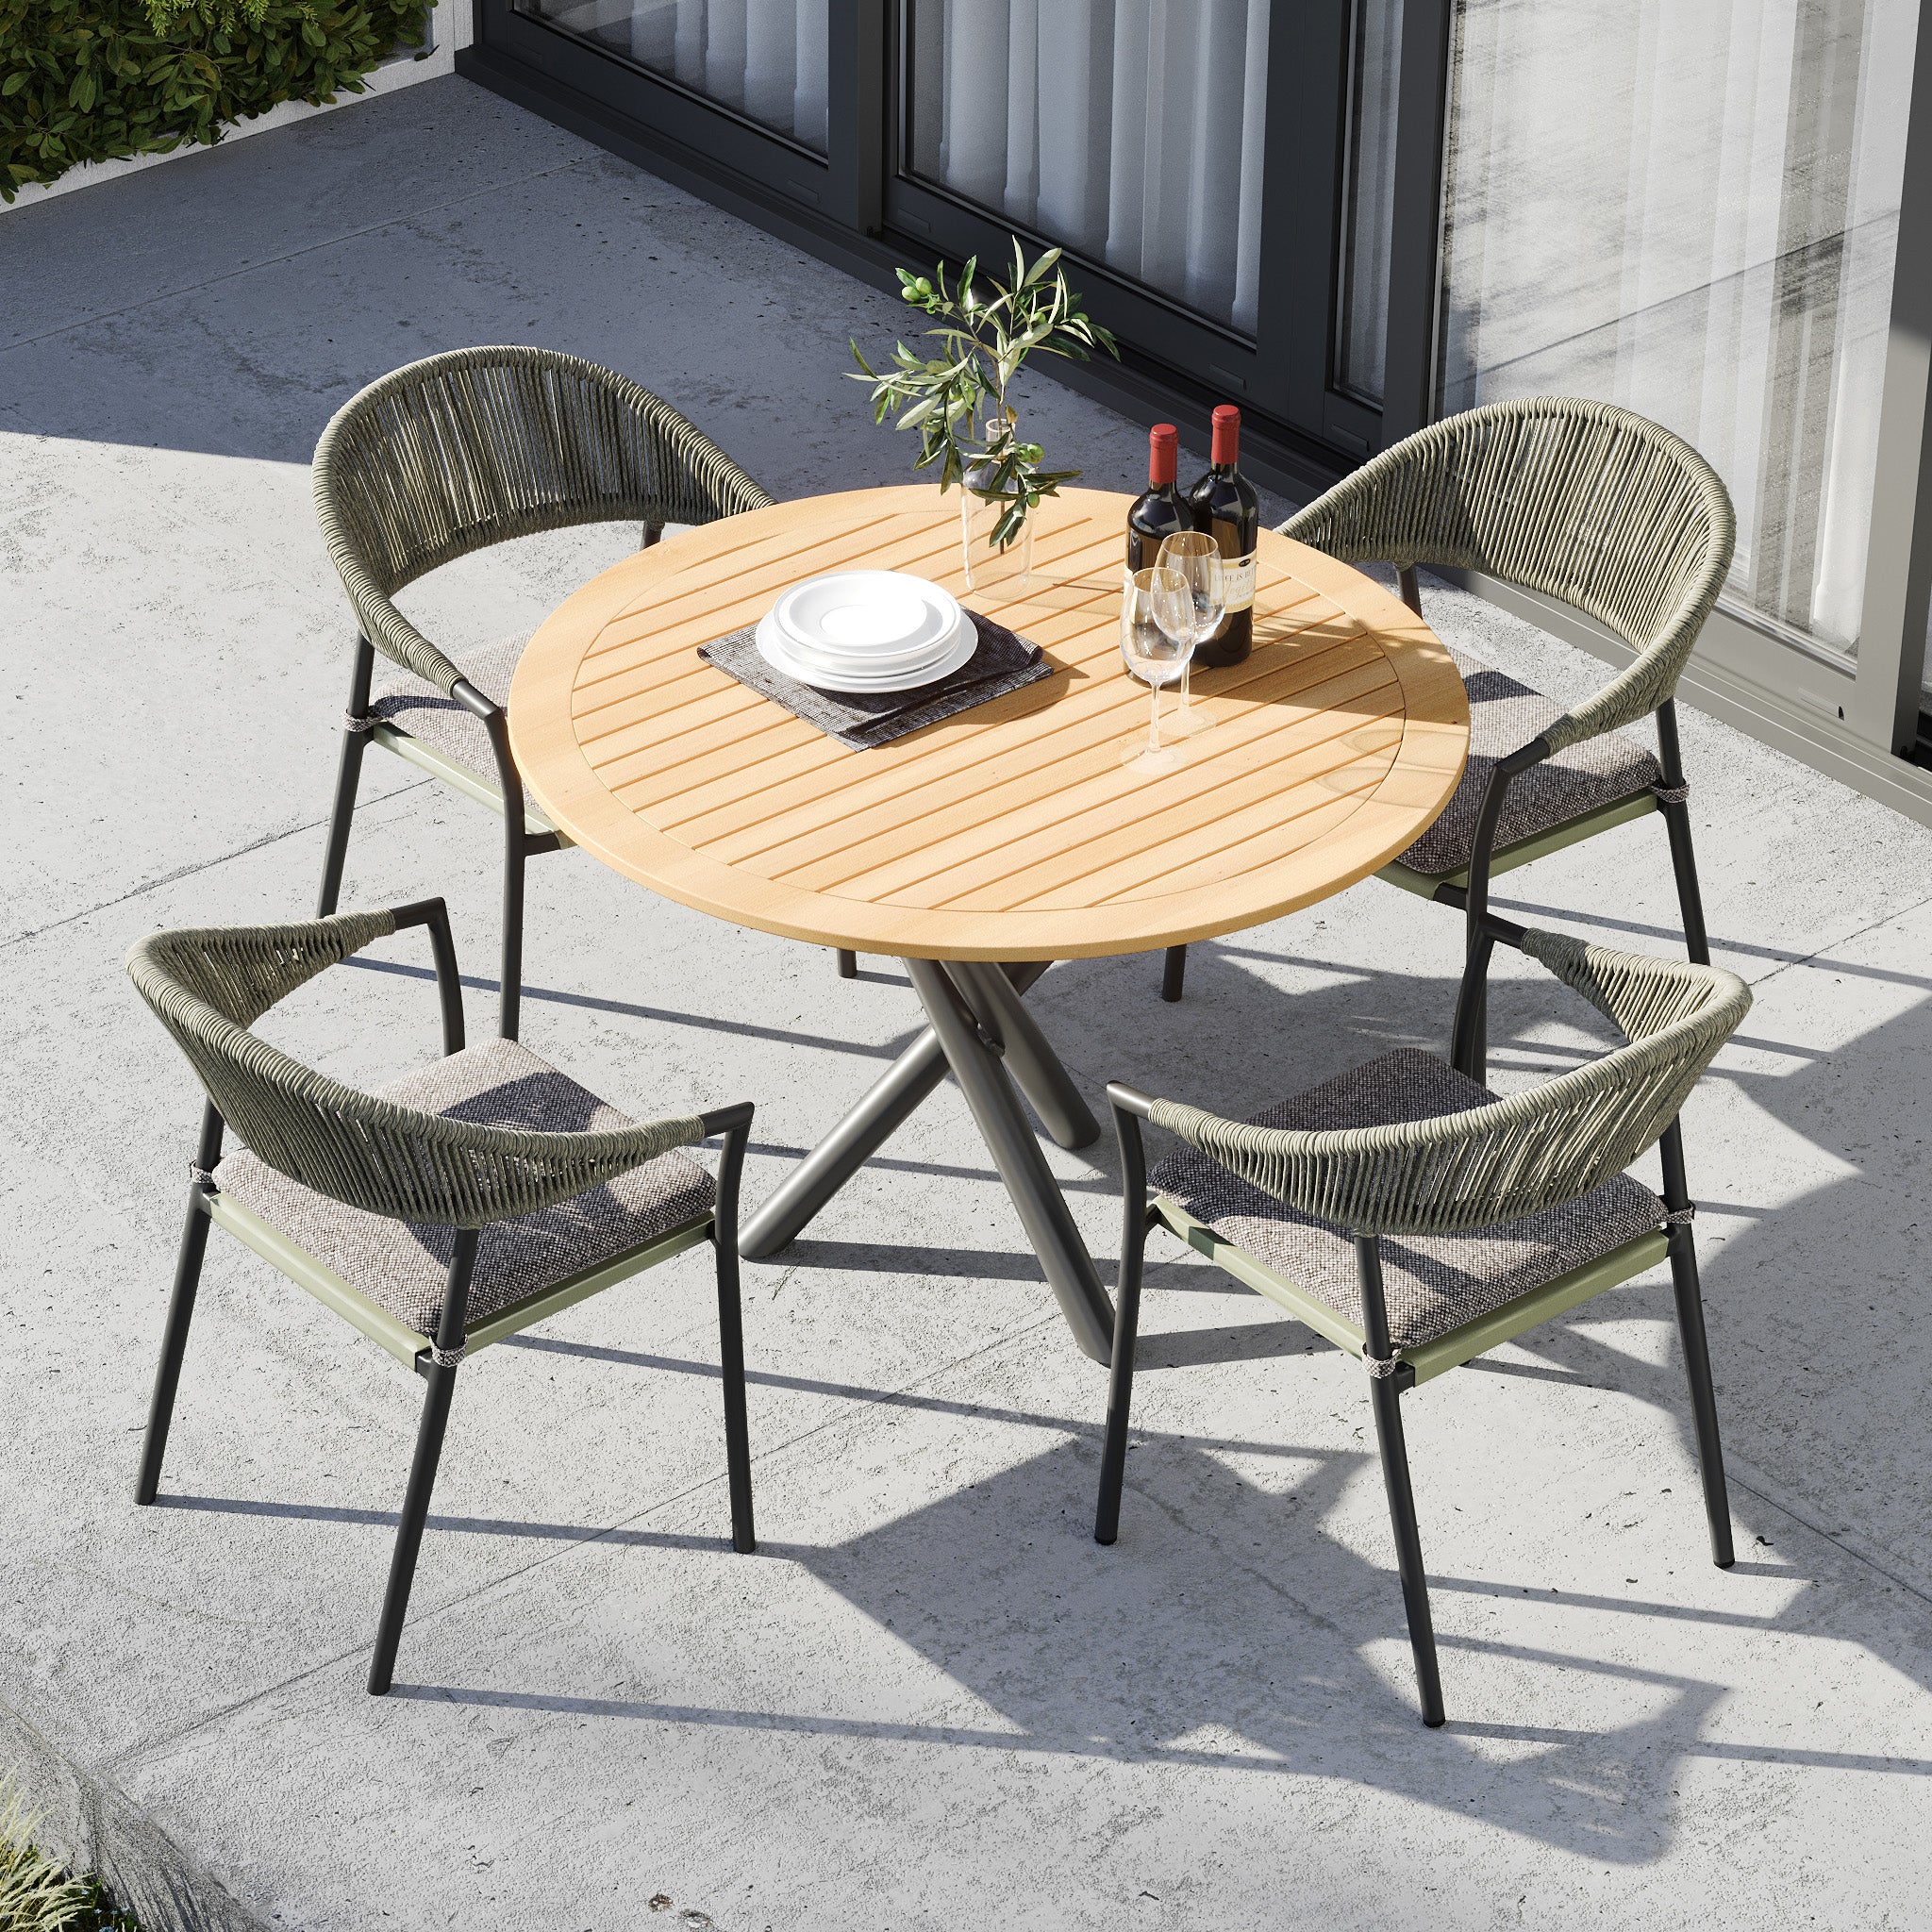 Cloverly 4 Seat Round Dining Set with Teak Table Top in Olive Green